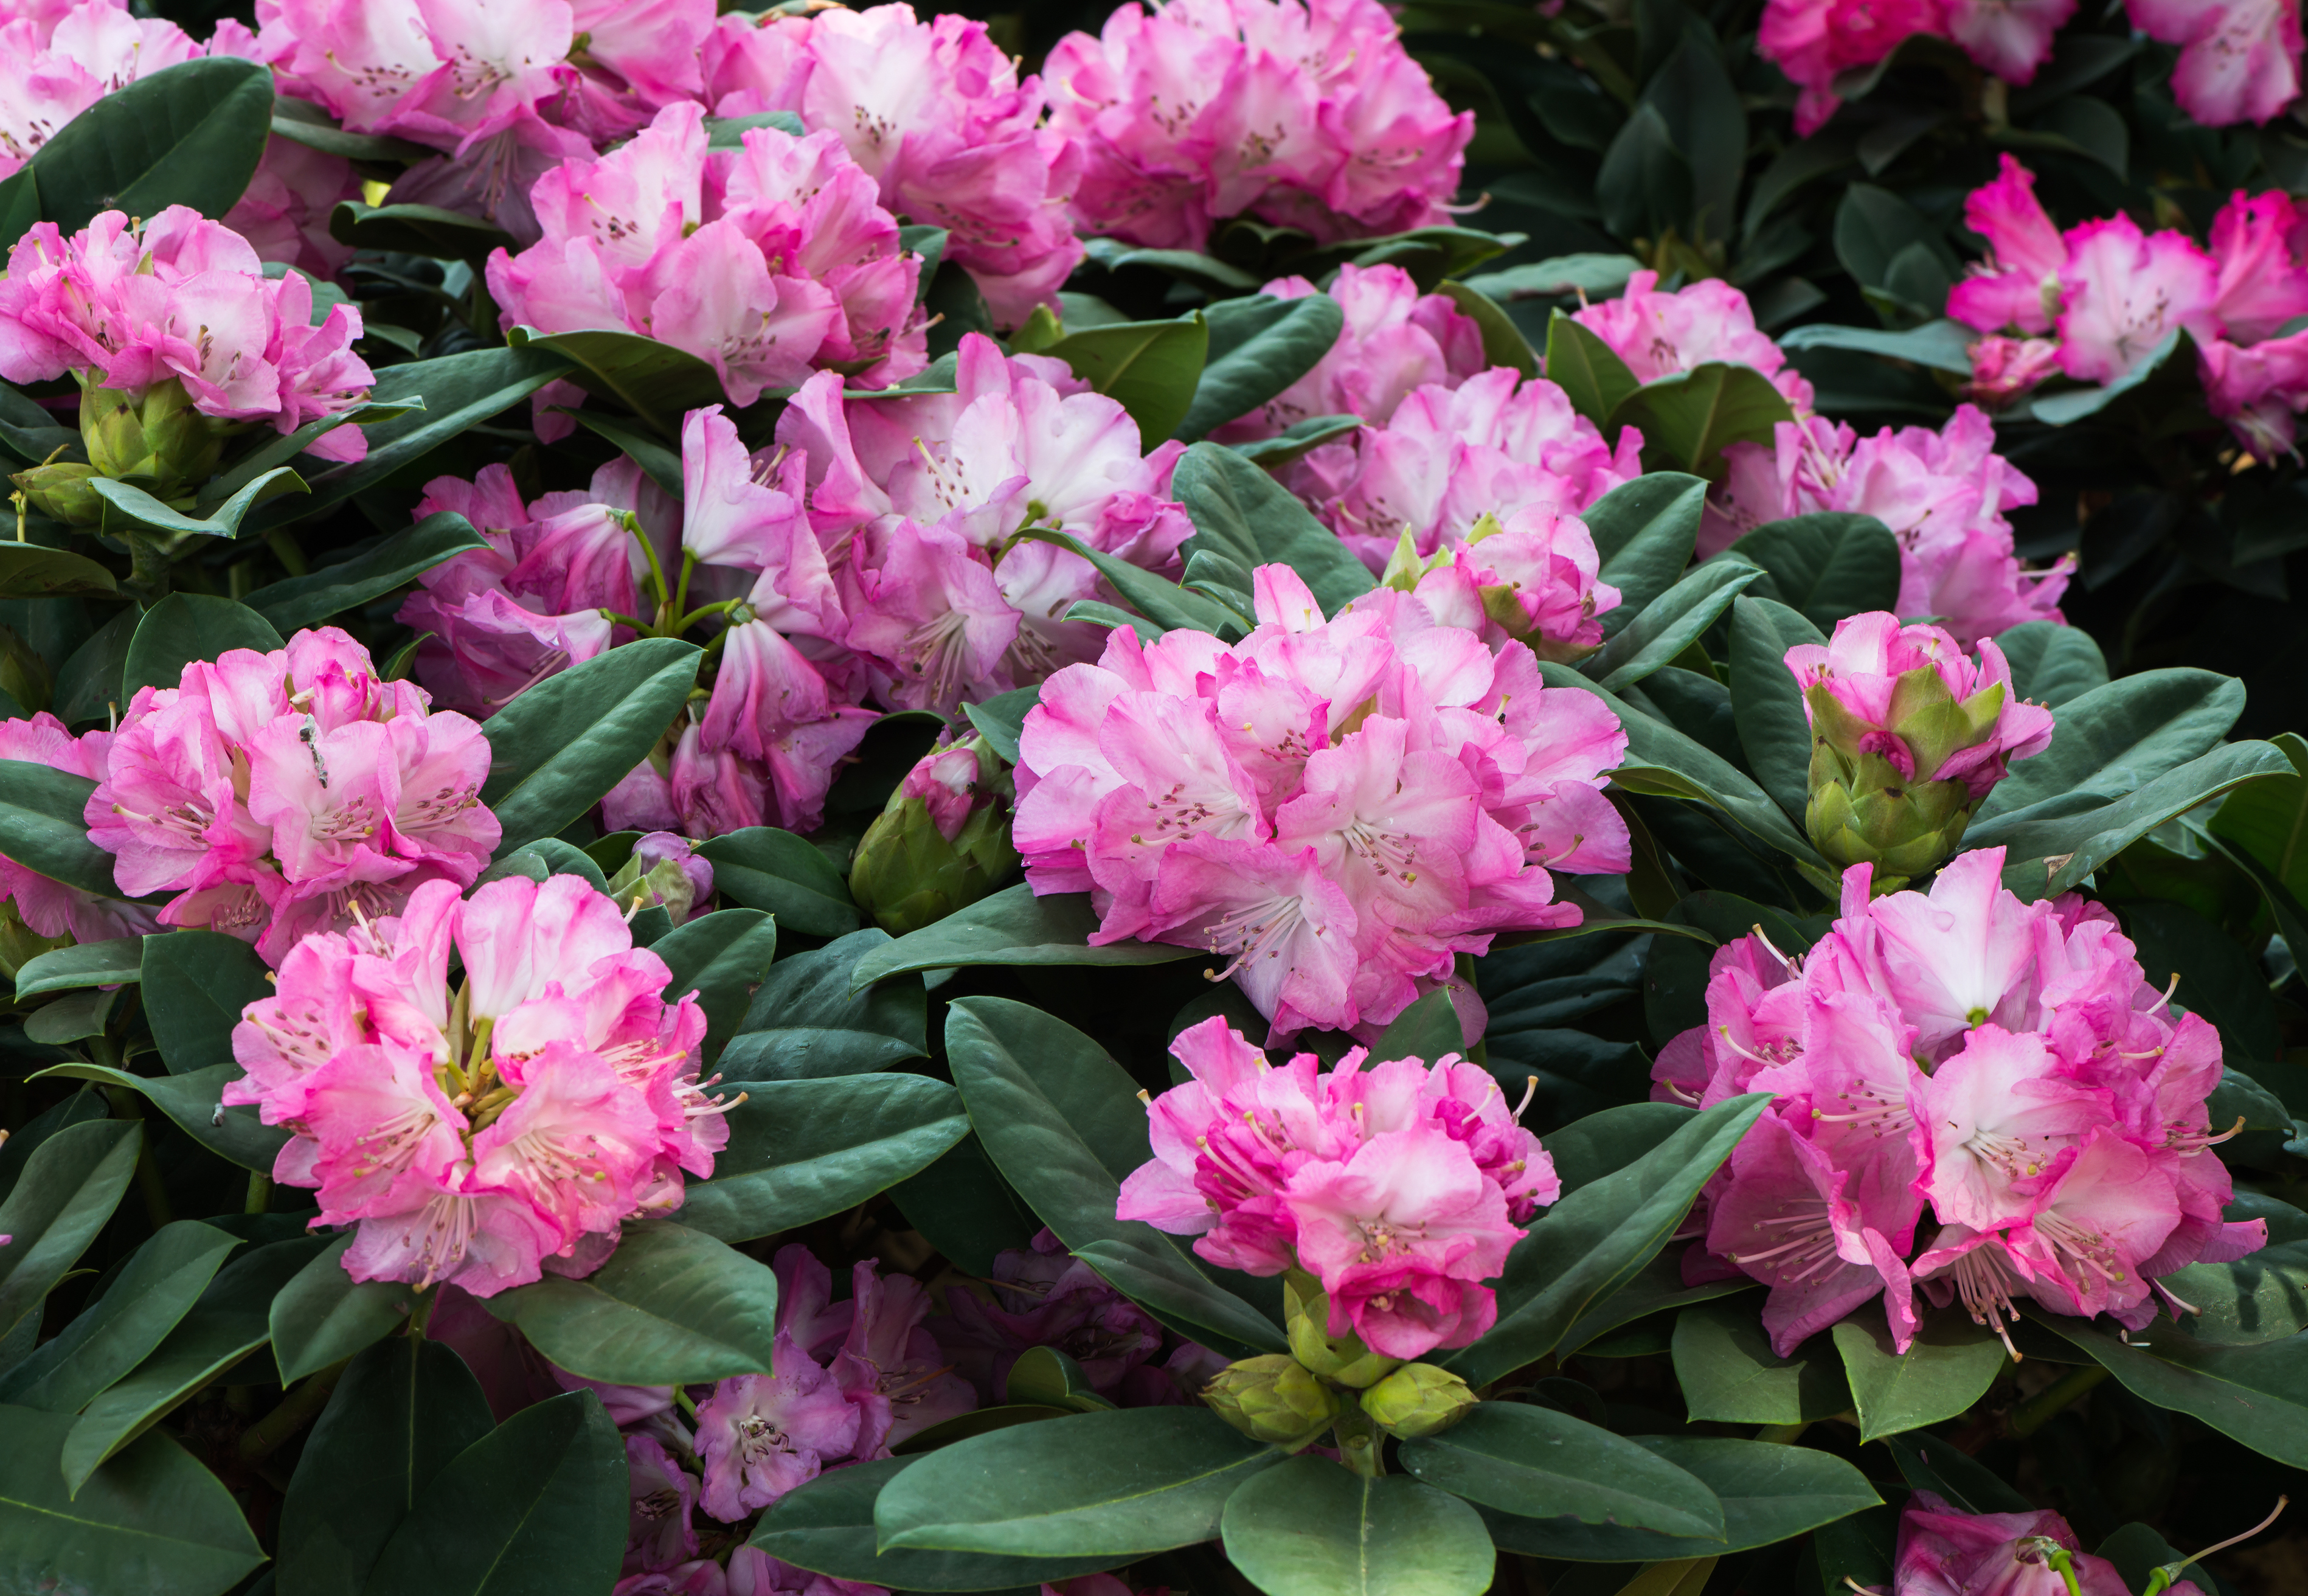 Spring-flowering shrubs like rhododendron are popular (Thinkstock/PA)